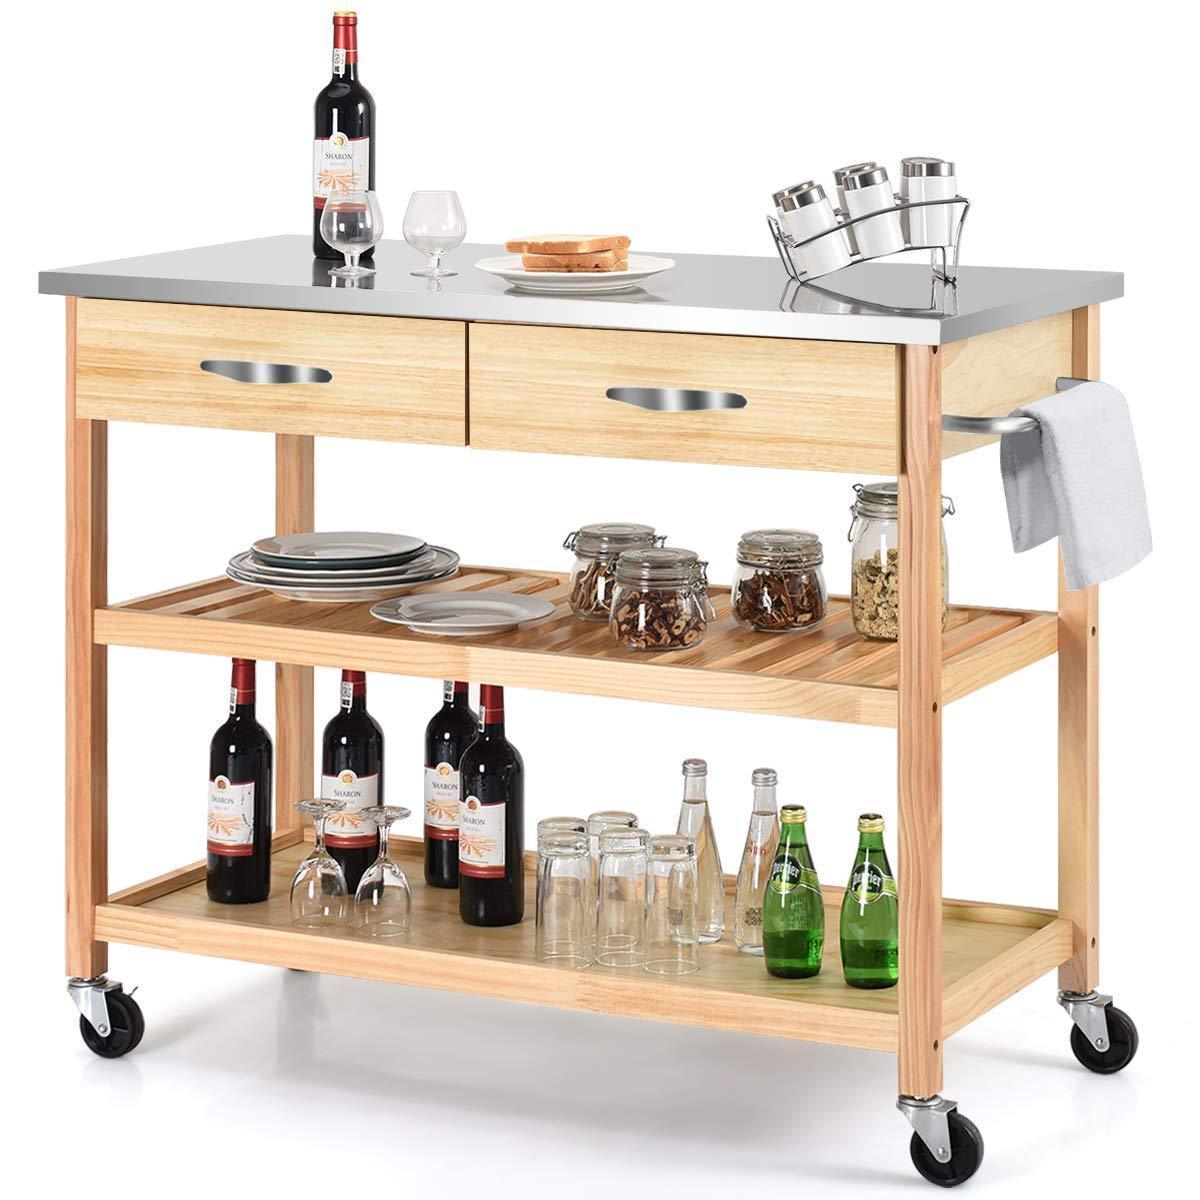 Giantex Kitchen Trolley Cart Rolling Island Cart Serving Cart Large Storage with Stainless Steel Countertop, Lockable Wheels, 2 Drawers and Shelf Utility Cart for Home and Restaurant Solid Pine Wood